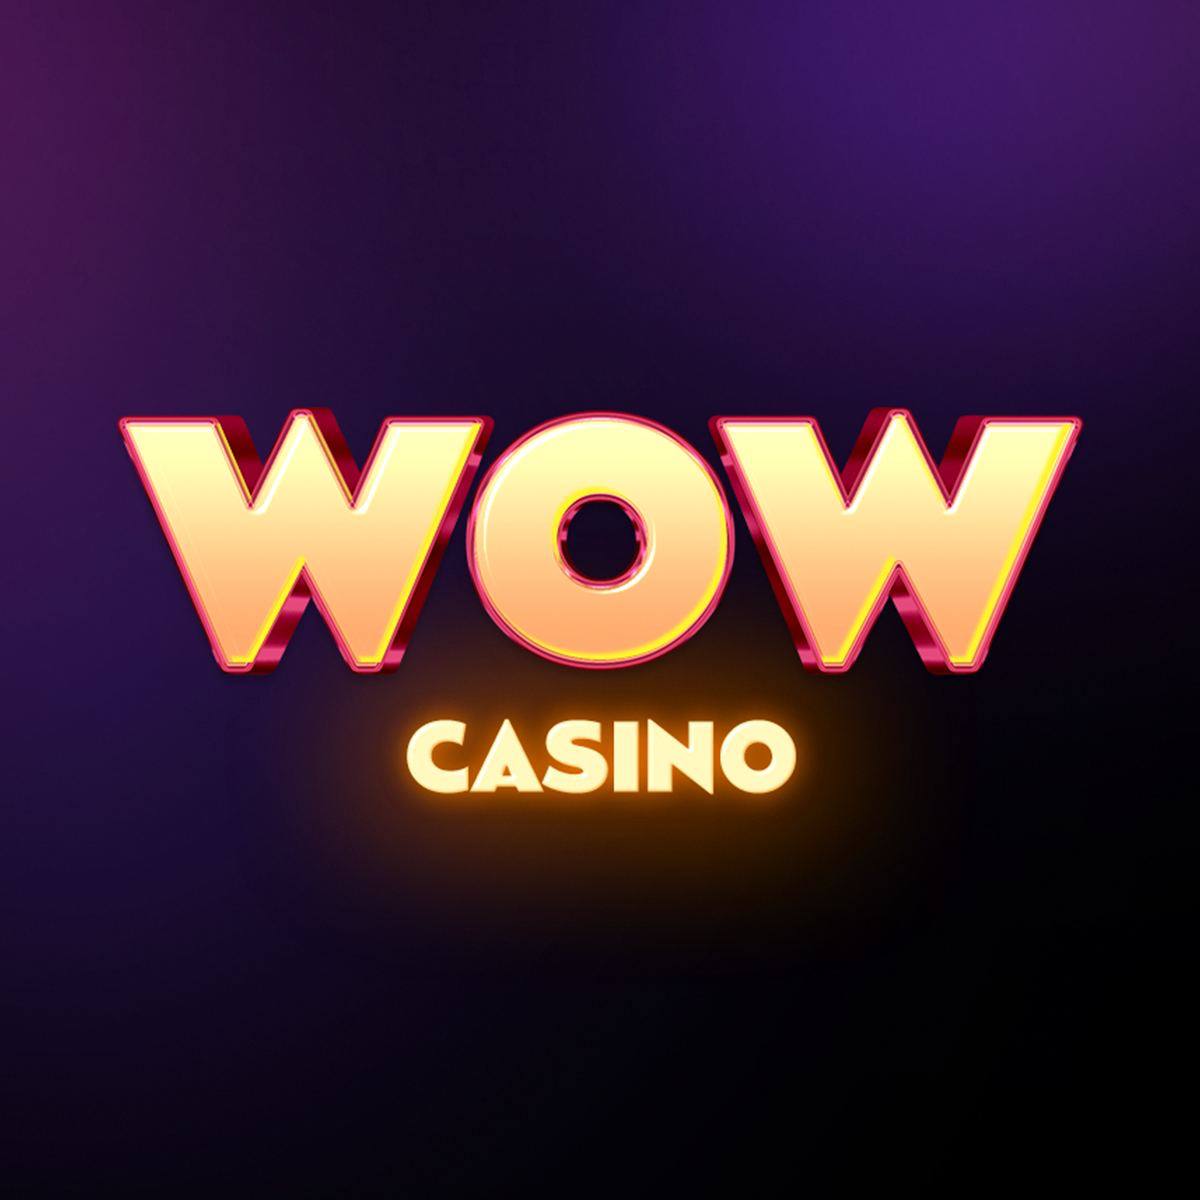 🚀 Airdrop: WOW Social Casino
💰 Value: 500 USDT + 10,000 $WOW Token
🏆 Winners: Random 100 Winners will get 100 $WOW
👥 Top 50 Scores: 500 $USDT
📅 End Date: 21st June, 2023

Go to the Airdrop Page
zealy.io/c/wowsocialcas…

#Airdrop #Airdrops #Crypto